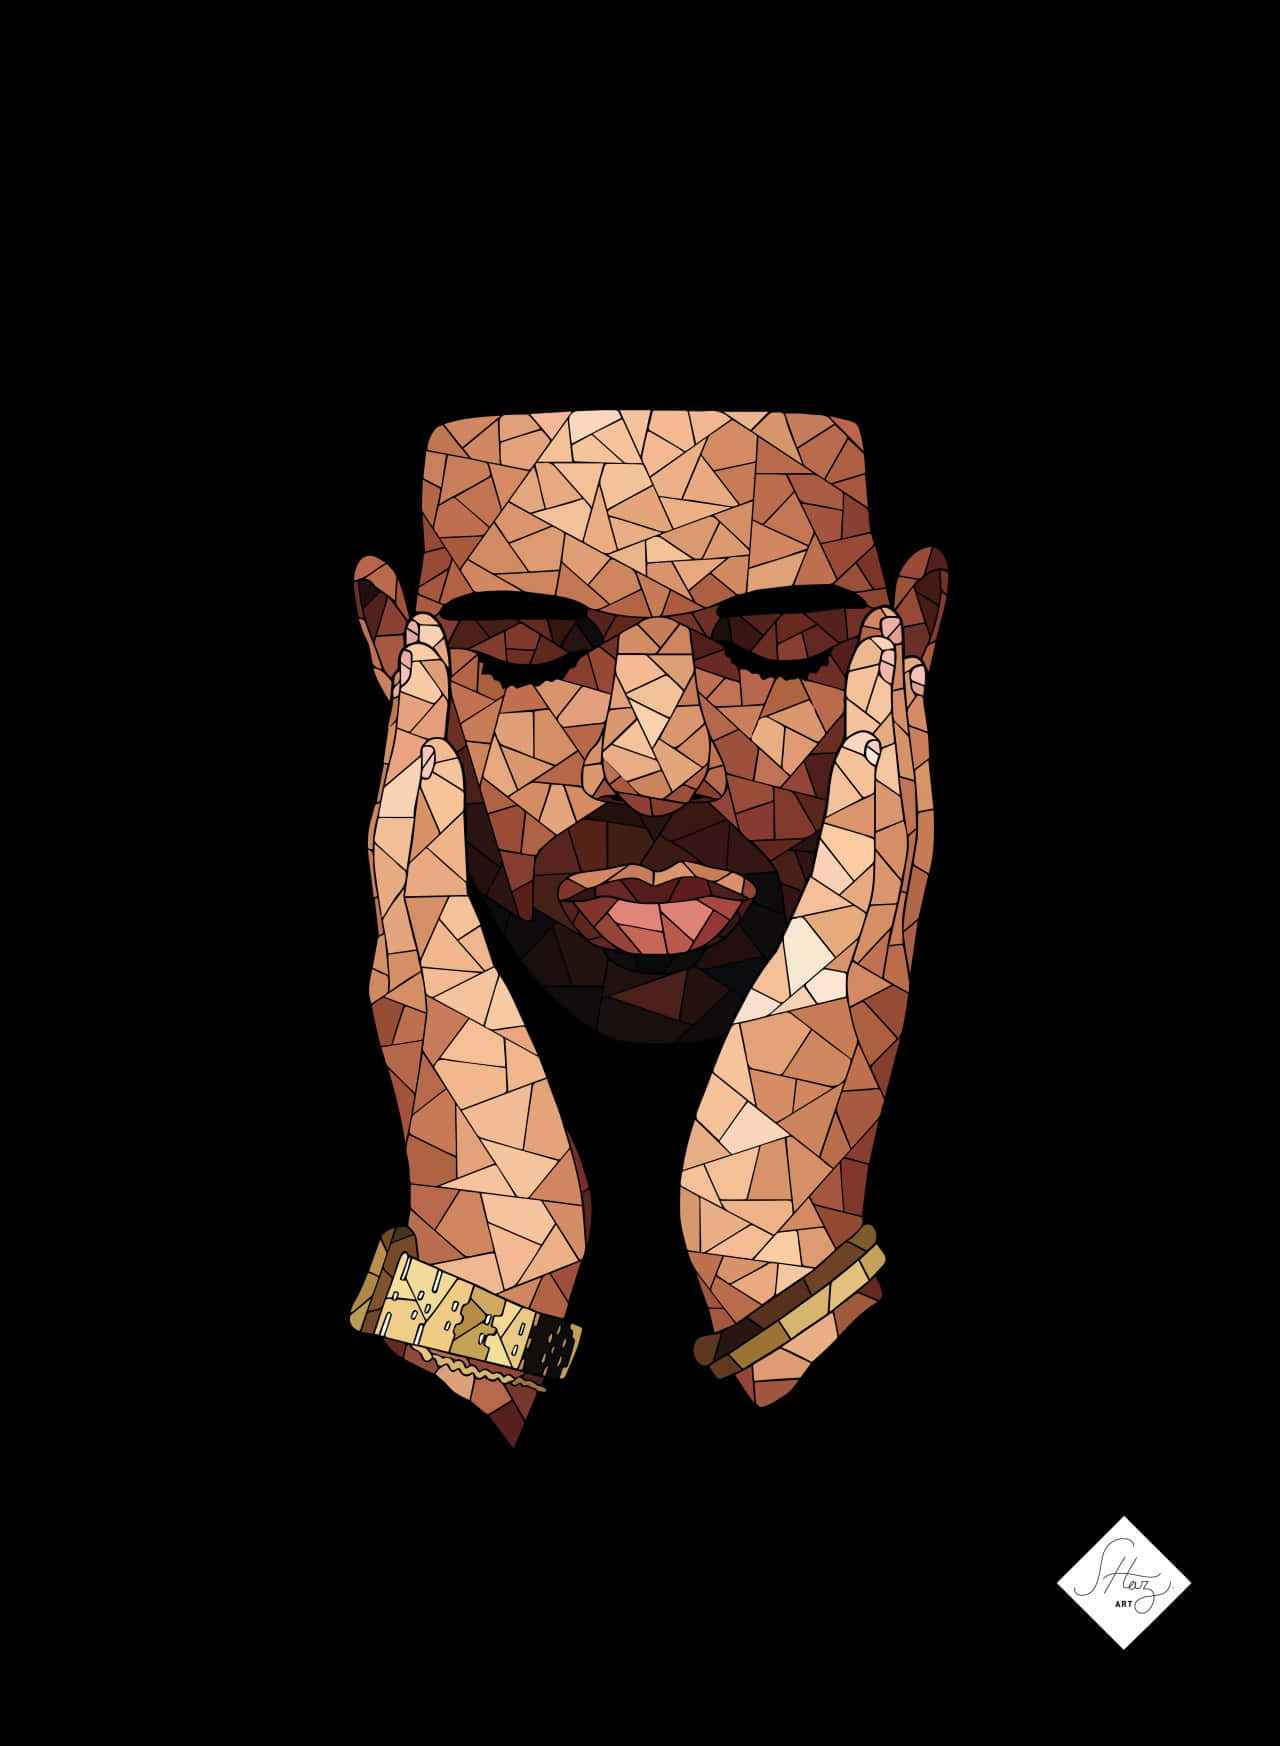 Drake’s Nothing Was The Same Album Cover Wallpaper